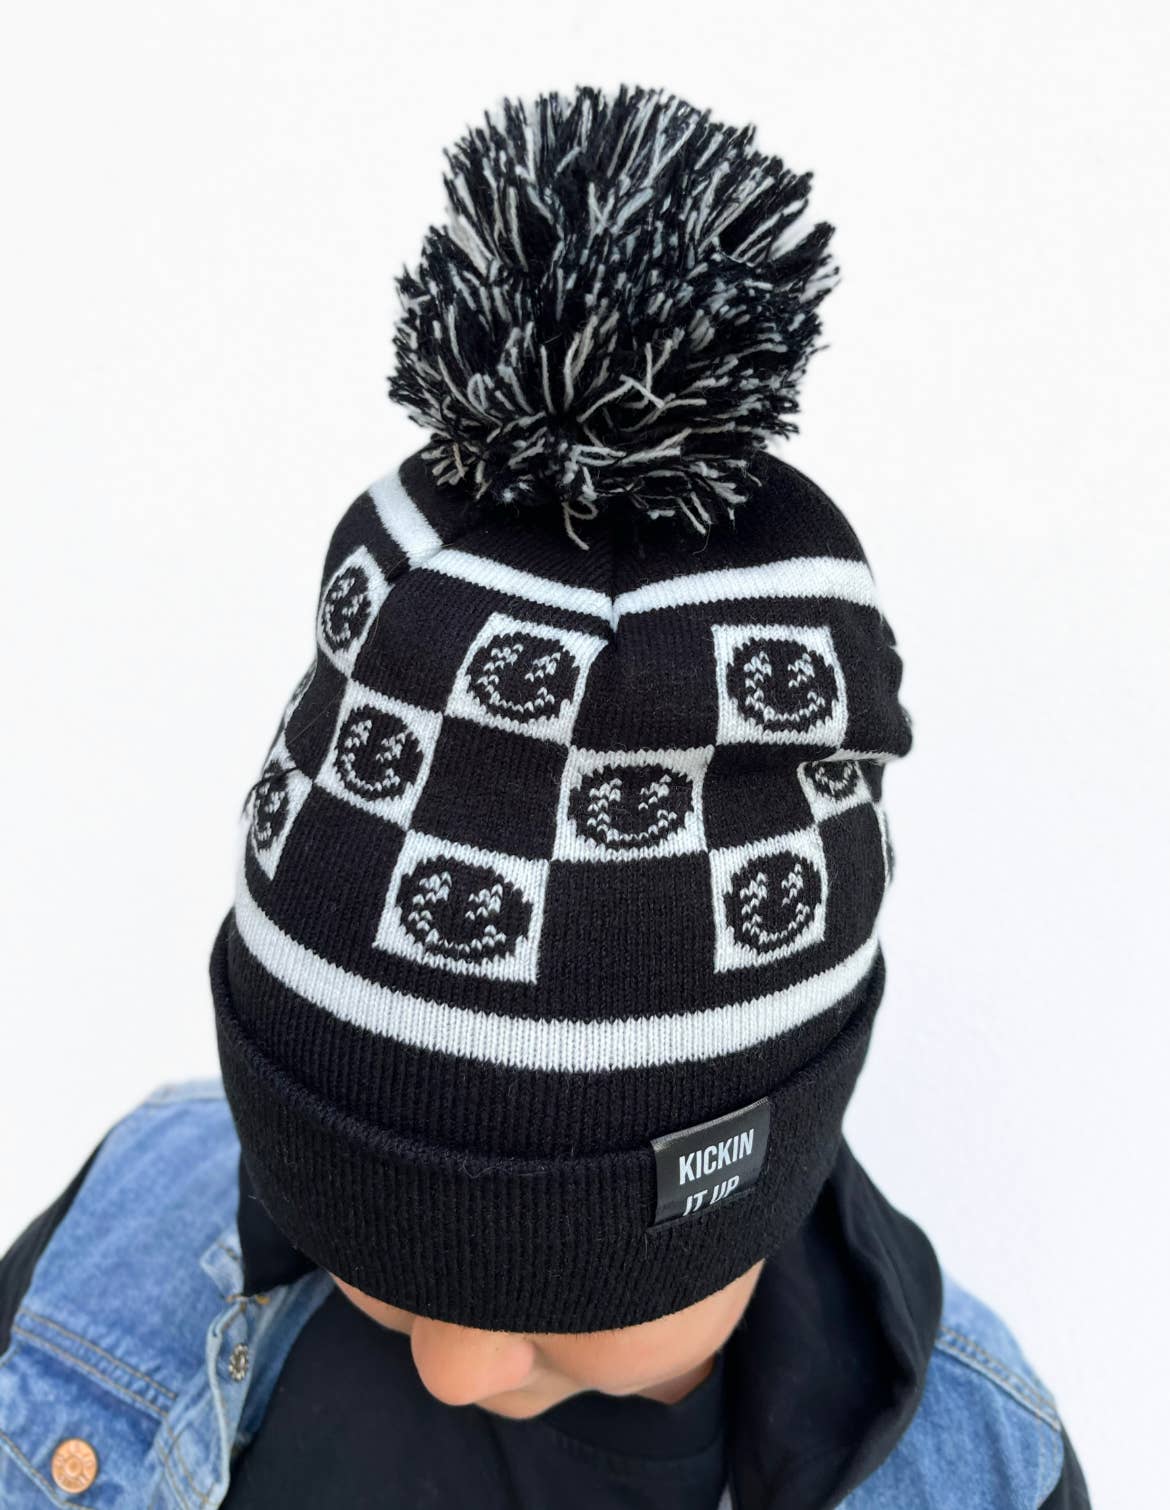 Black Smiley Check Beanie: Toddler 18 Months-4.5 Years Old